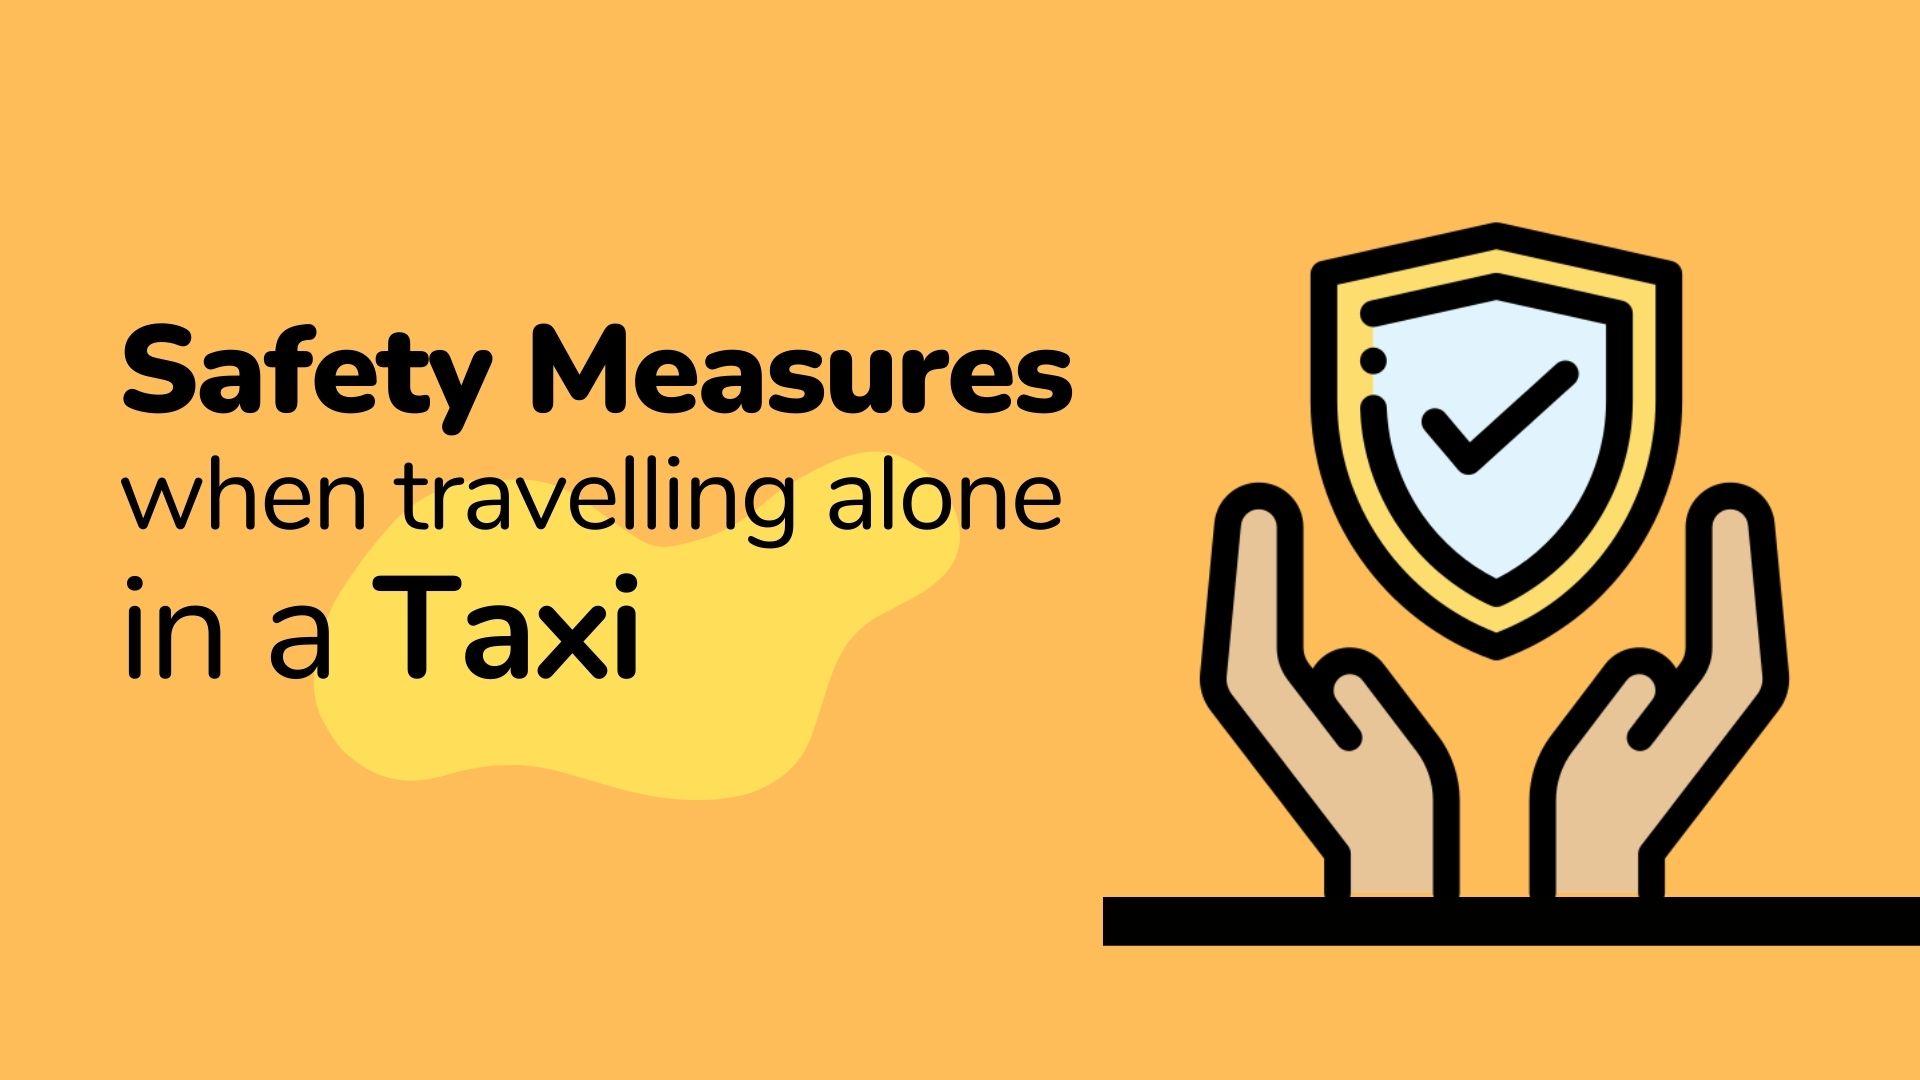 Safety tips wheb travelling alone in a taxi